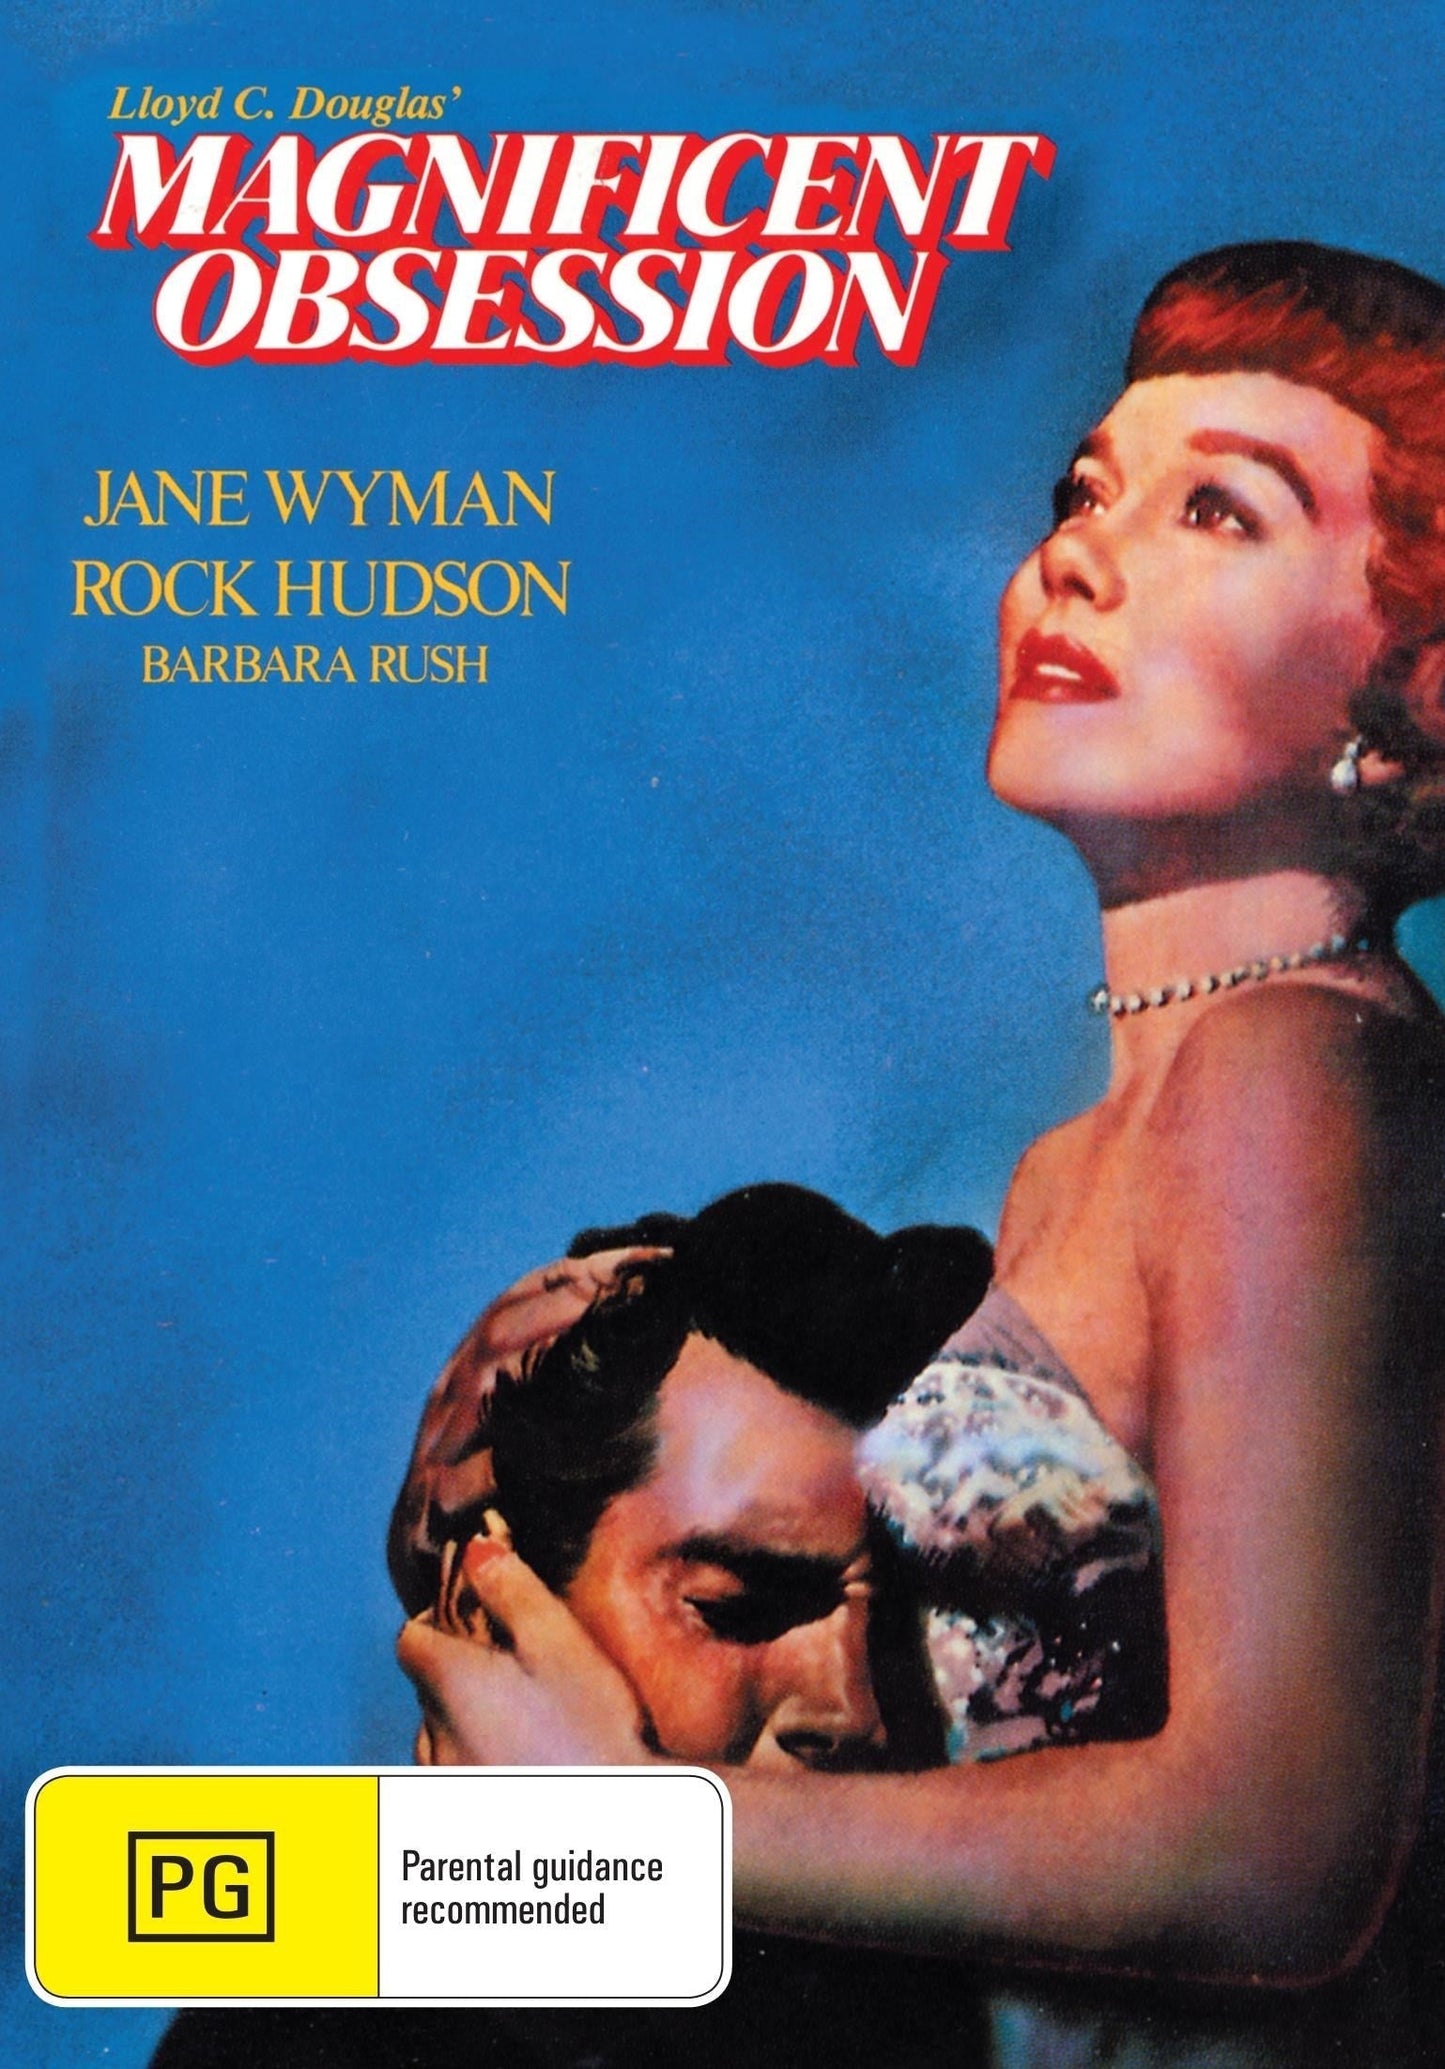 Magnificent Obsession rareandcollectibledvds